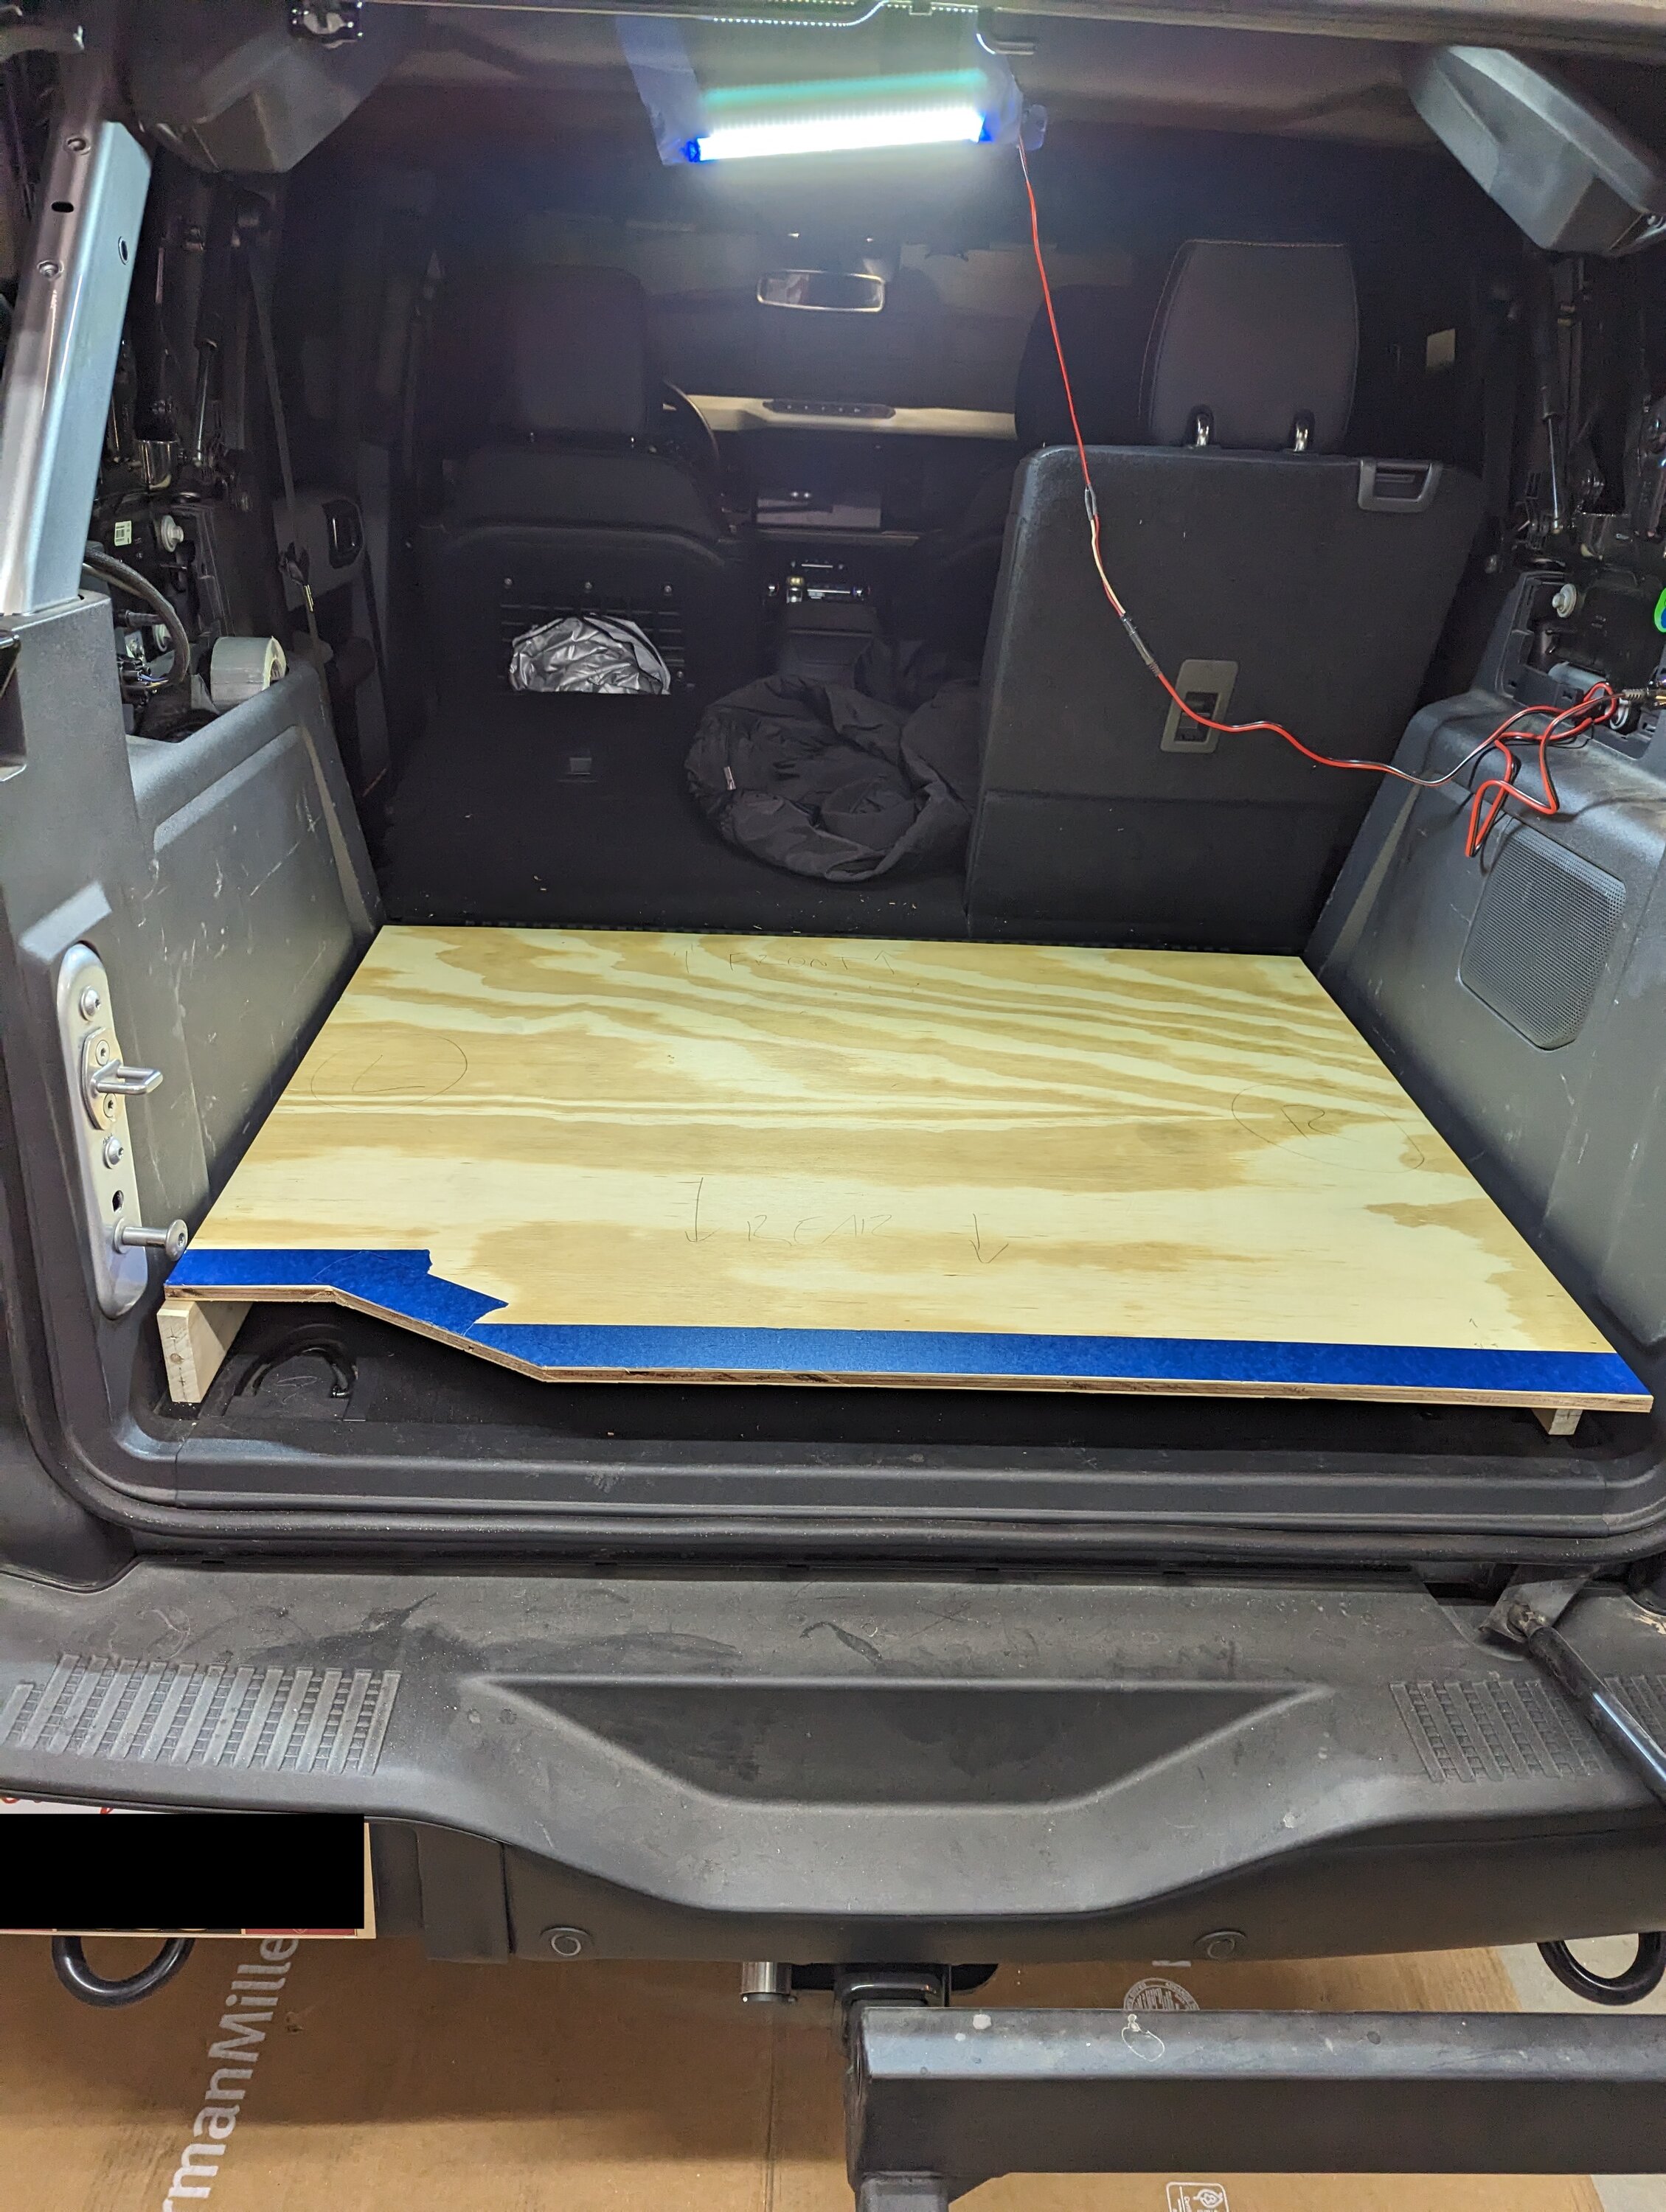 Ford Bronco Building a low-profile drawer system for my Badlands - what's your input? PXL_20230908_035049519.MP